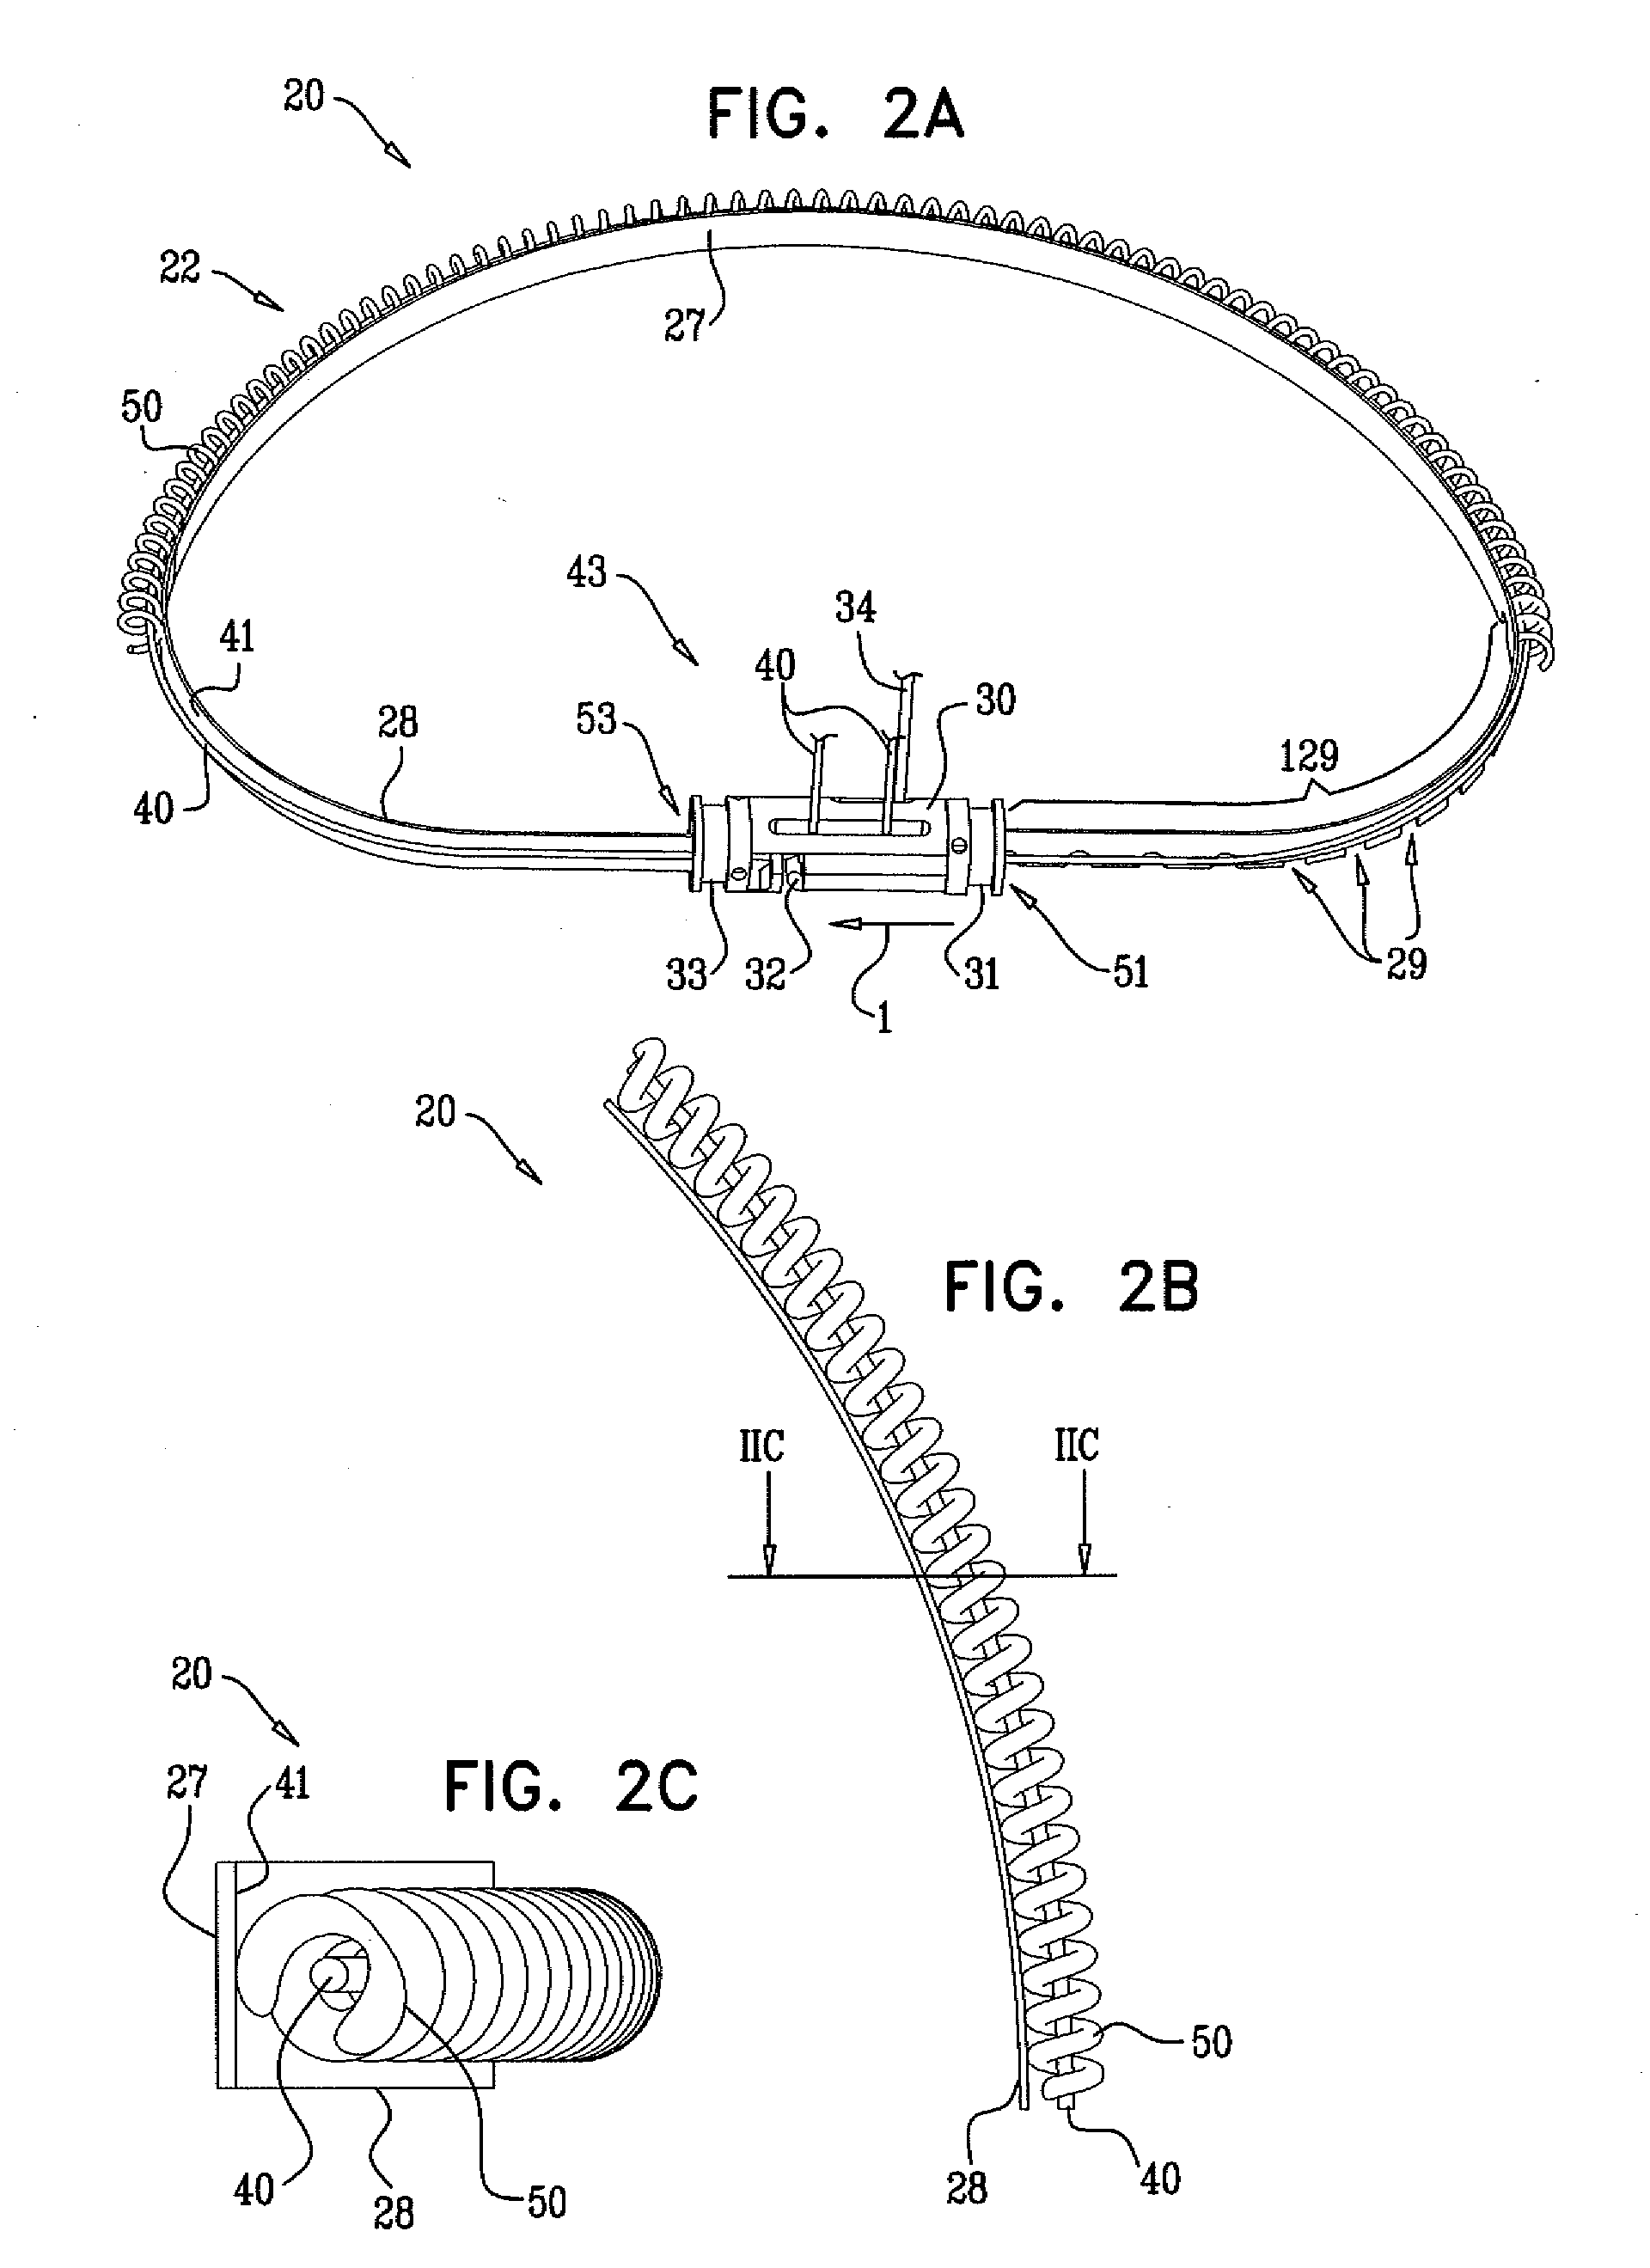 Actively-engageable movement-restriction mechanism for use with an annuloplasty structure